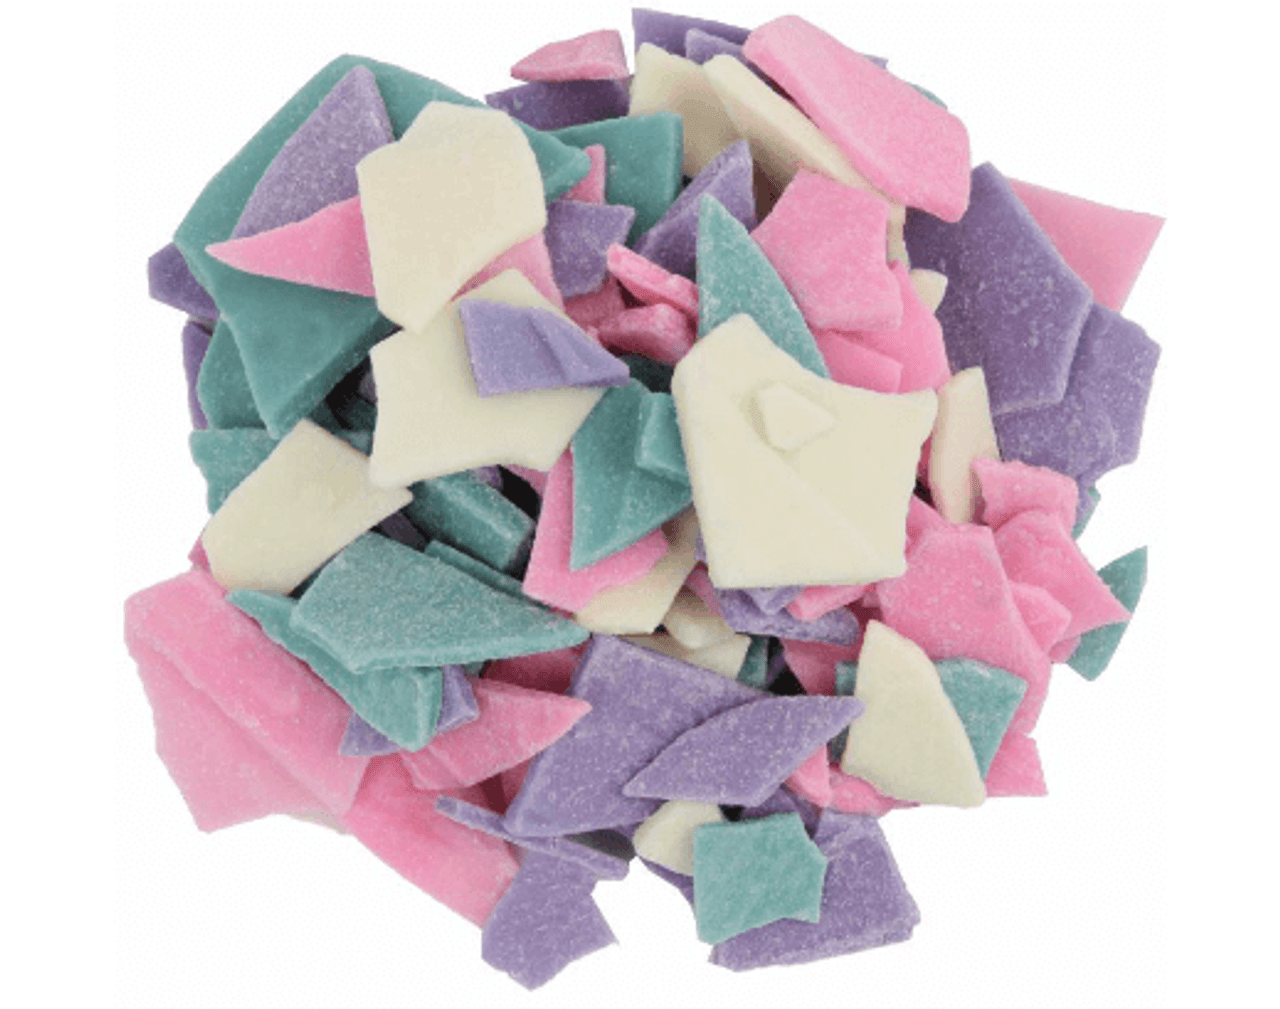 TOPPERS Unicorn Bark Topping - 10 lb | Colorful Candy Delight for Ice - Chicken Pieces